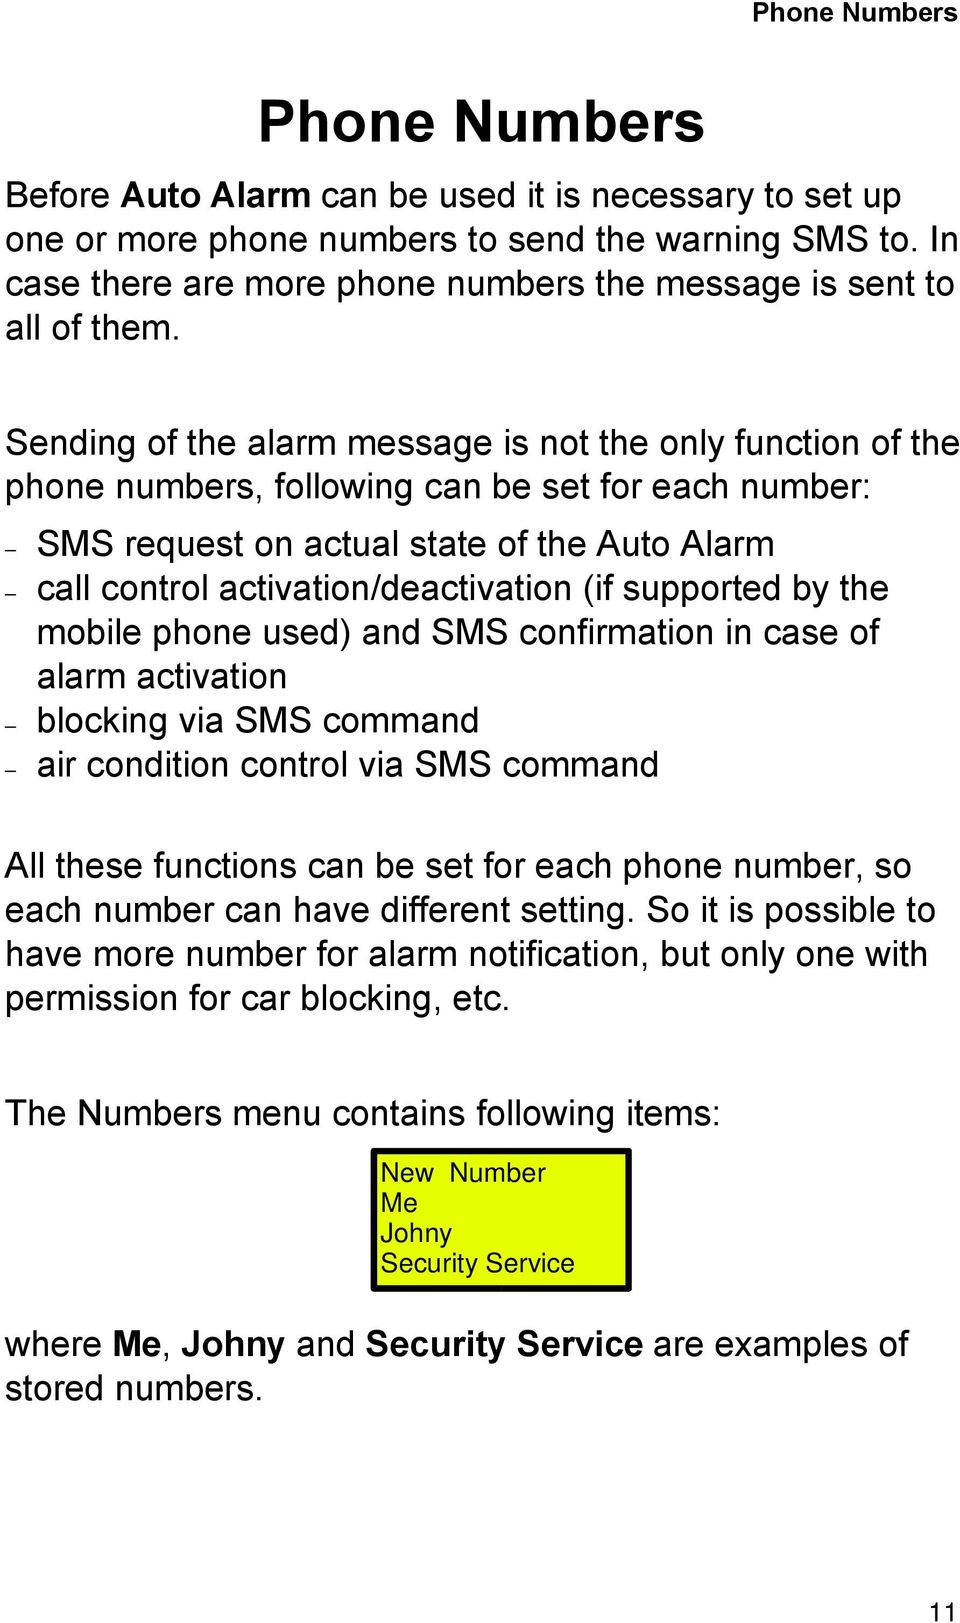 Sending of the alarm message is not the only function of the phone numbers, following can be set for each number: SMS request on actual state of the Auto Alarm call control activation/deactivation